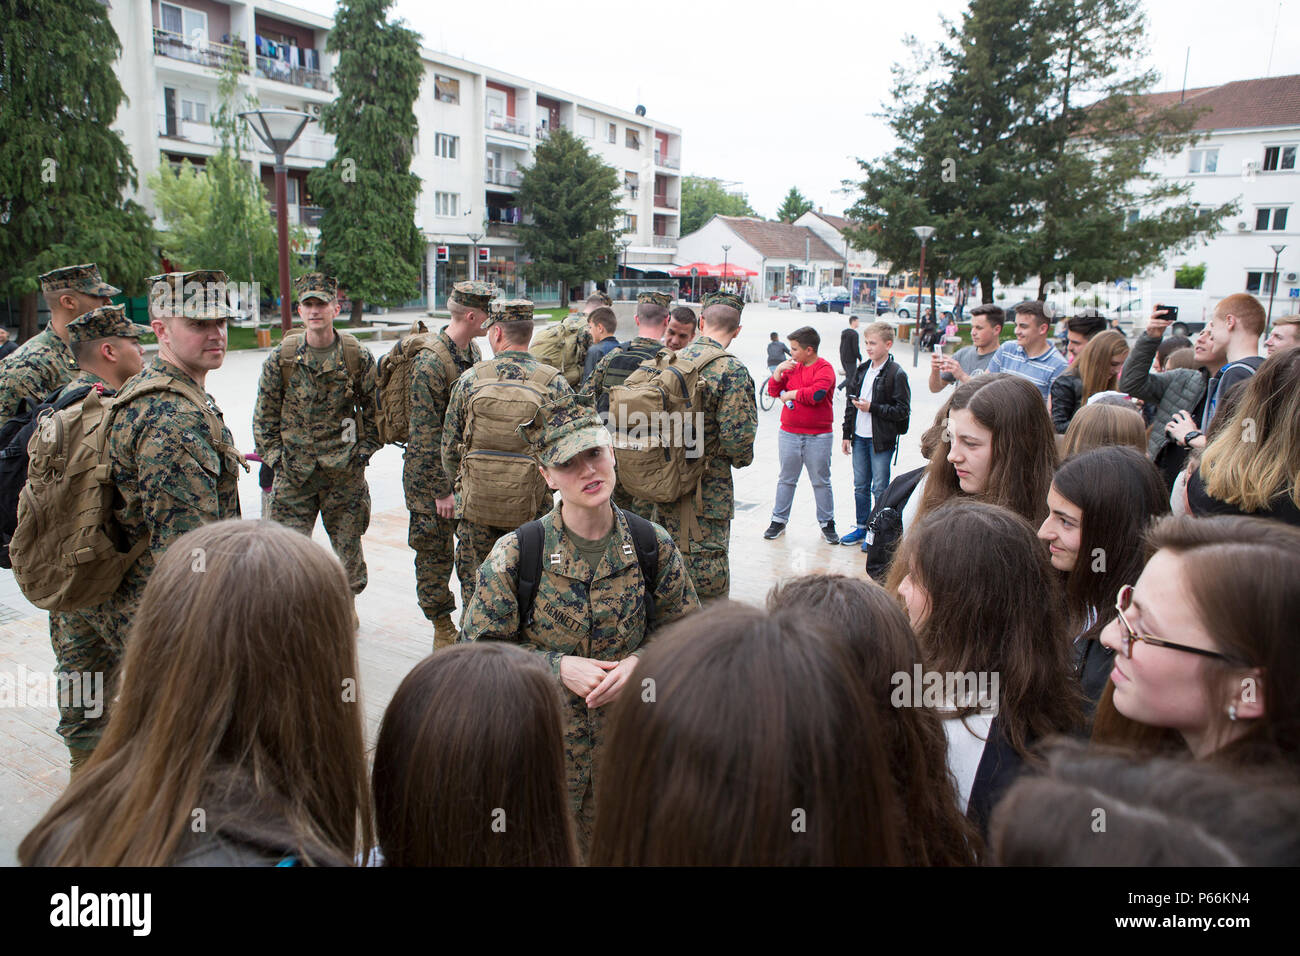 Capt. Brittney Bennett, a judge advocate with 3rd Civil Affairs Group, Force Headquarters Group, Marine Forces Reserve, speaks with young girls while participating in the program called American Corners, where they have the opportunity to teach local children about American culture and the Marine Corps during exercise Platinum Wolf 2016, in Bujanovac, Serbia, May 11, 2016. The Marines visited two American Corners sites in Bujanovac and Vranje during the exercise. The program is sponsored by the U.S. embassy and a local host institution; it aims to reinforce intercultural exchange and friendshi Stock Photo